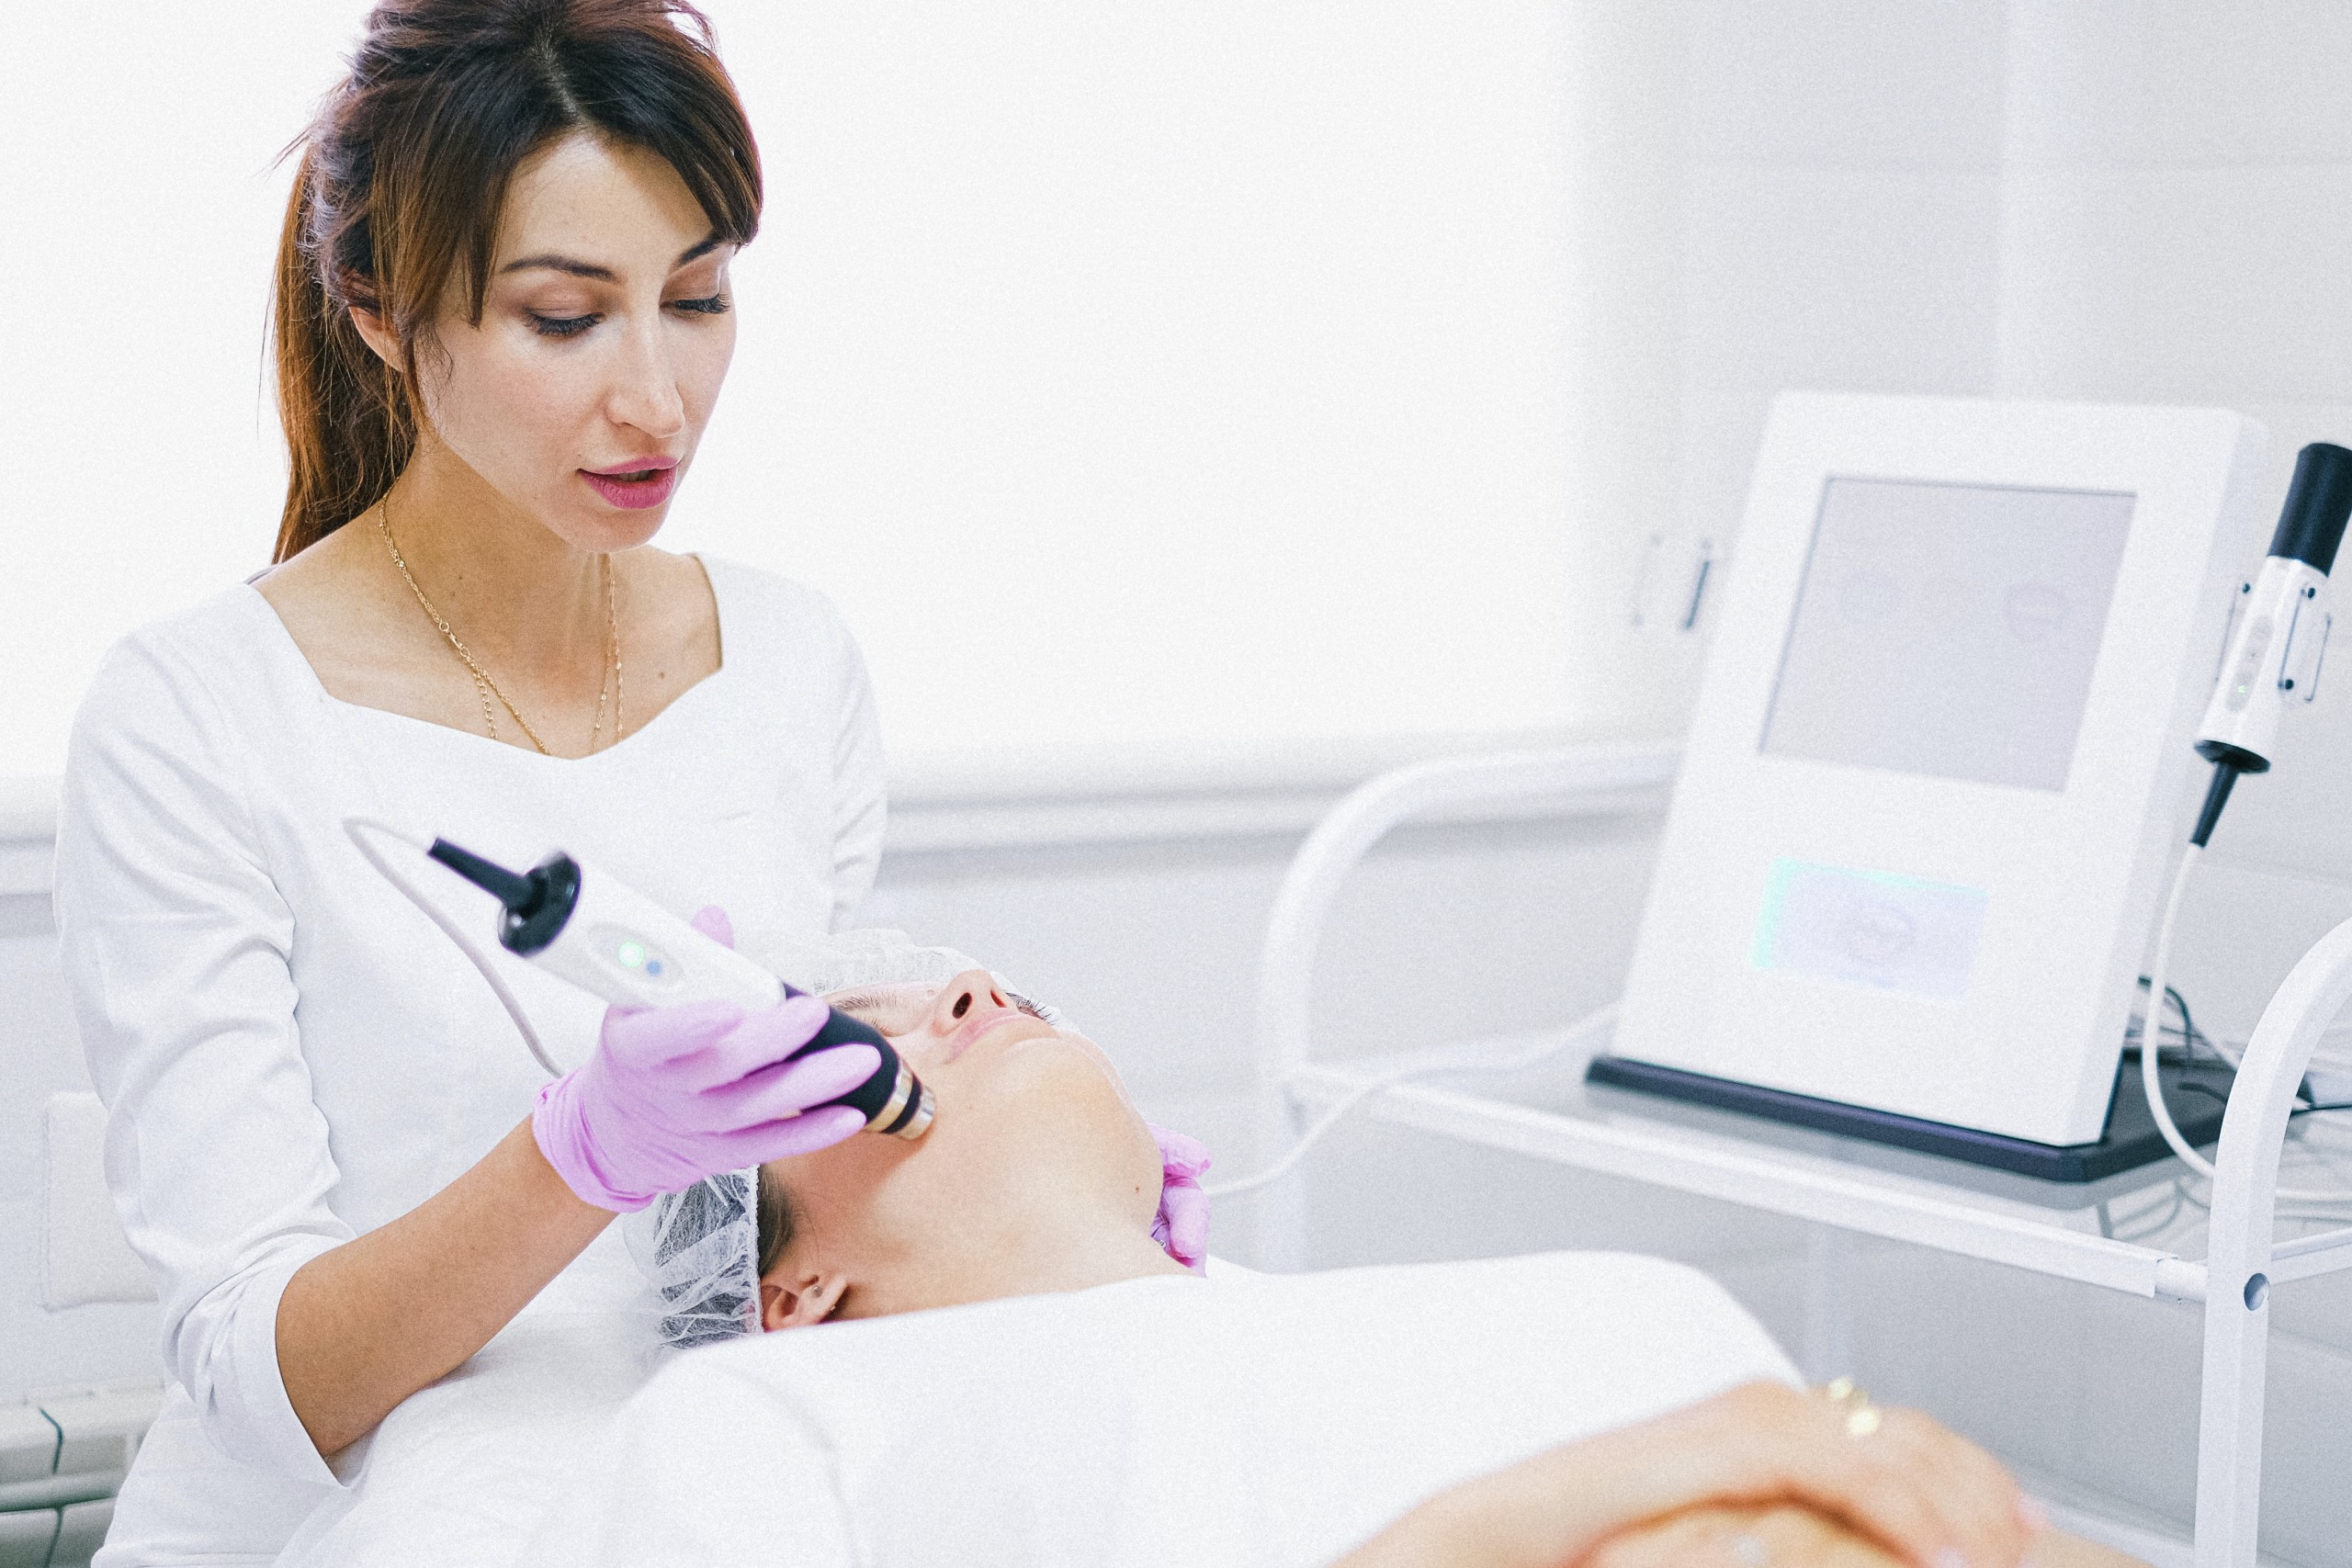 The Role of Digital Marketing for Aesthetic Practitioners